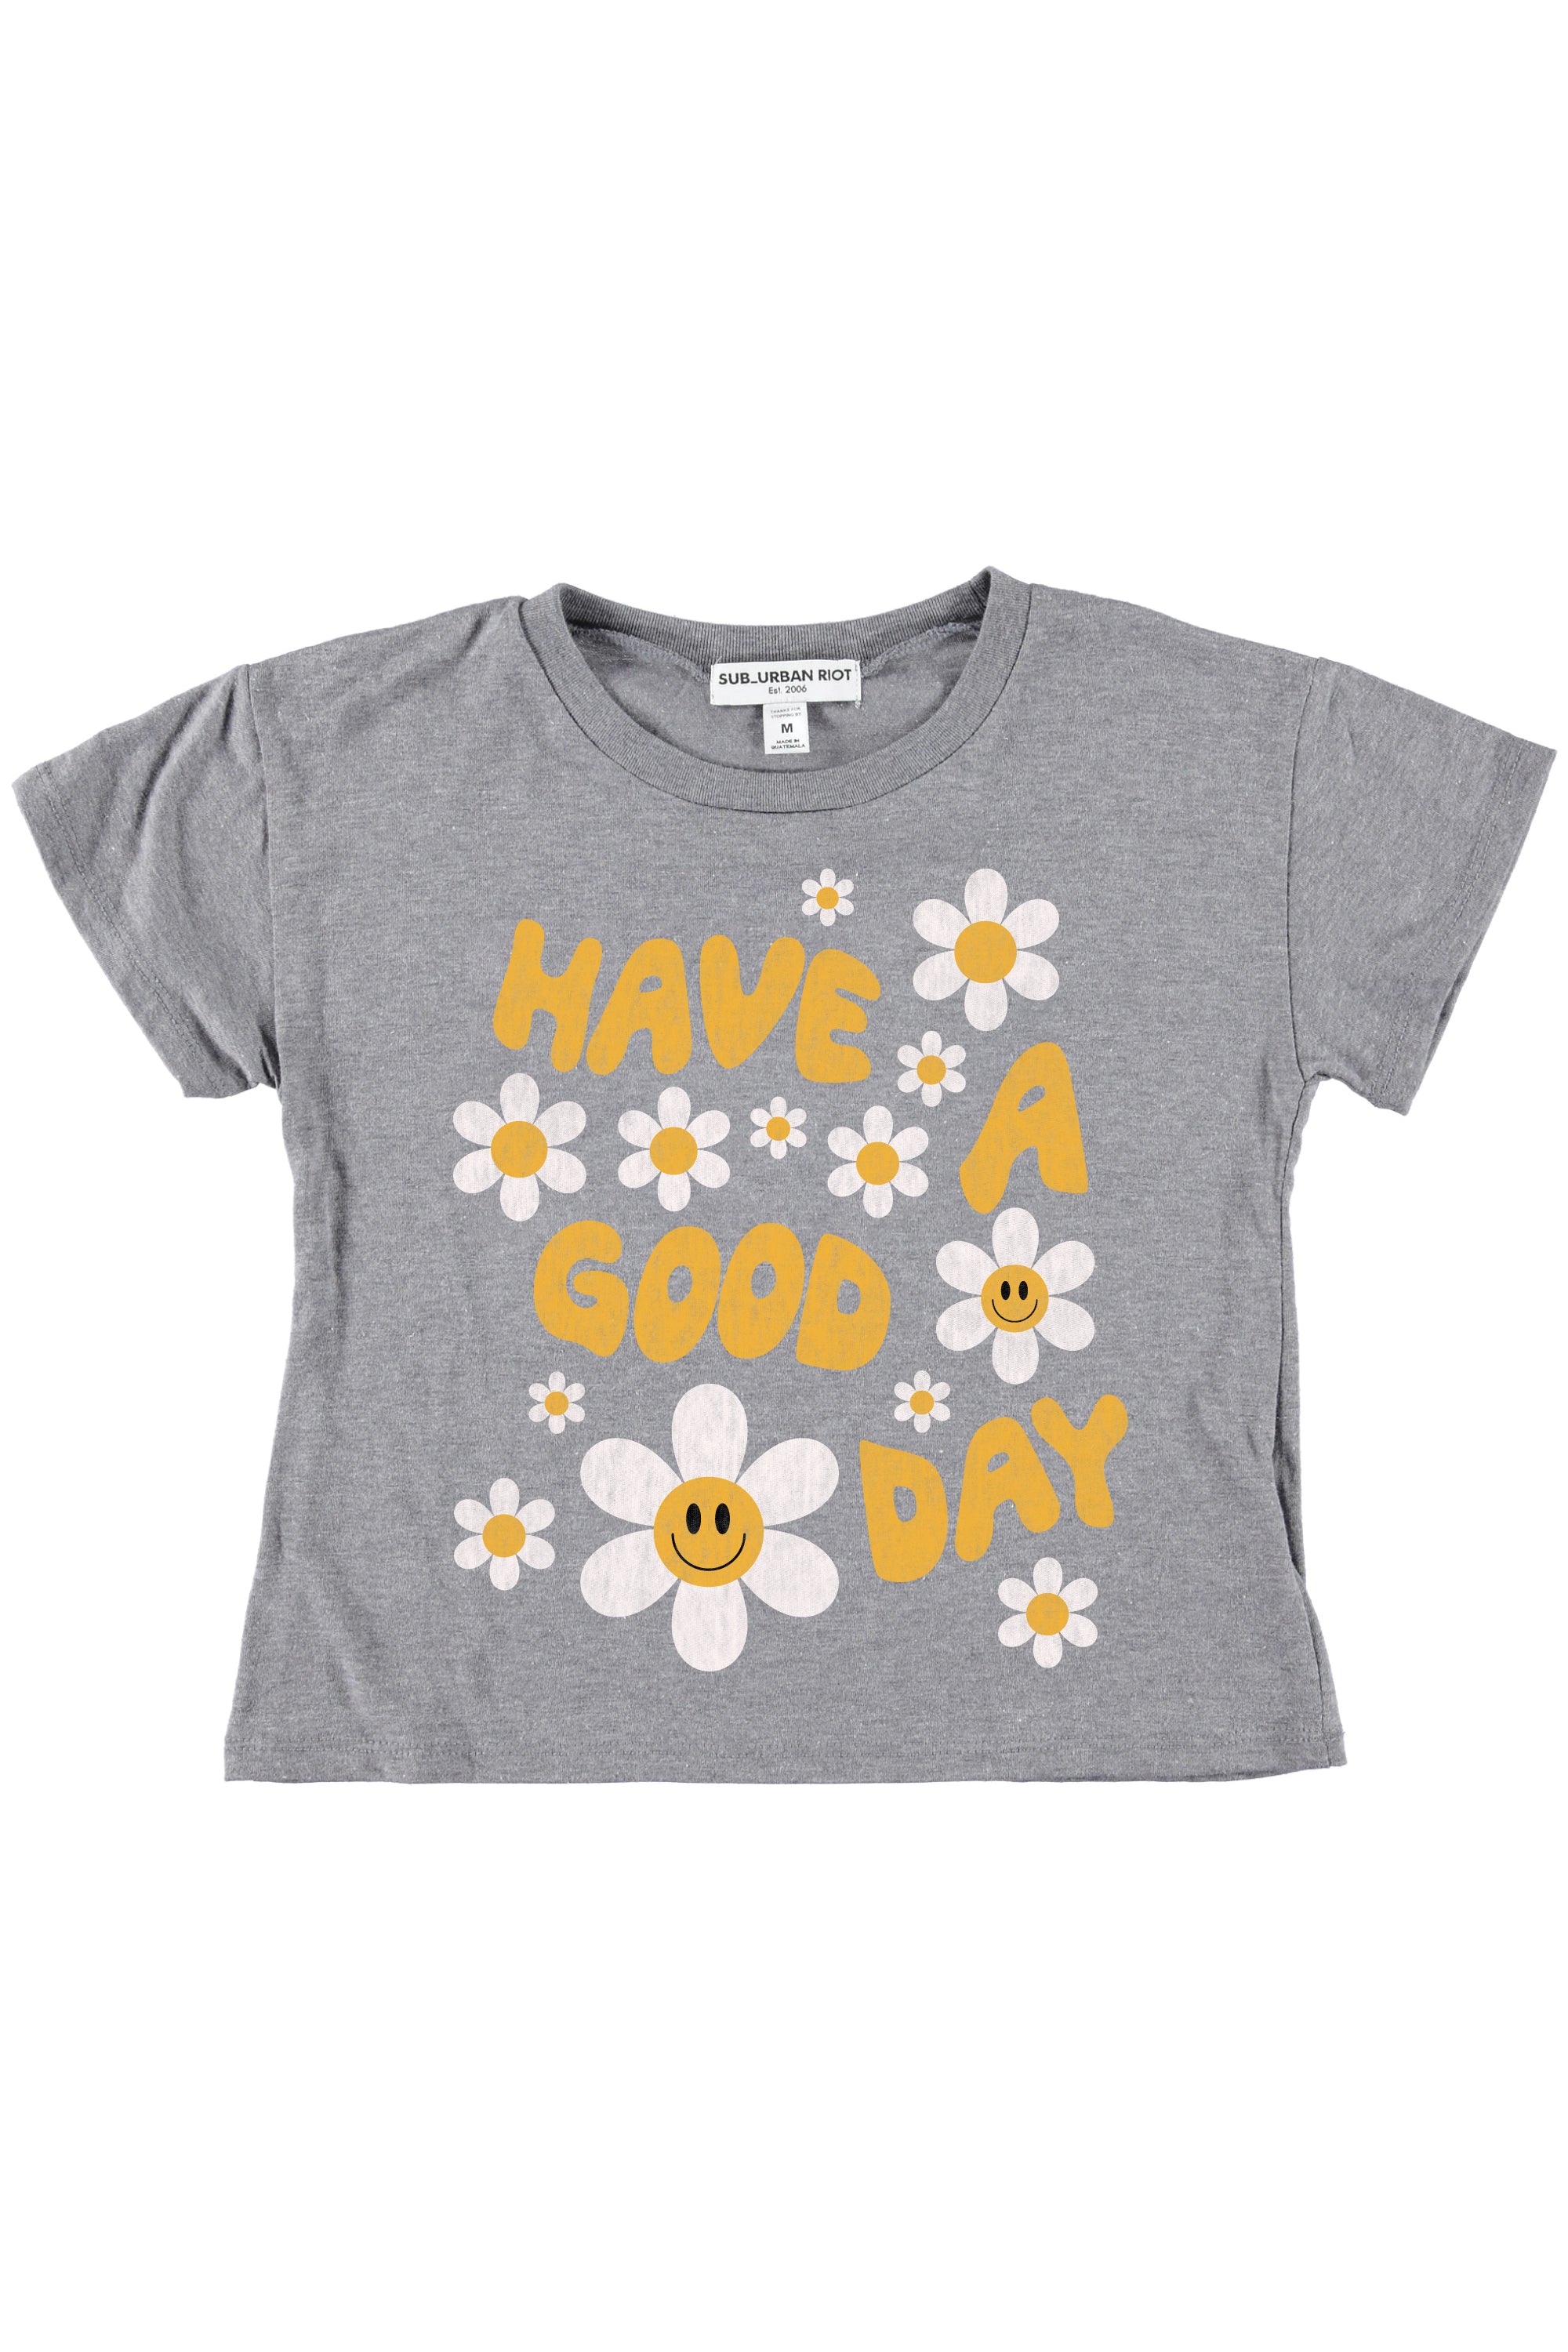 HAVE A GOOD DAY YOUTH SIZE CROP TEE